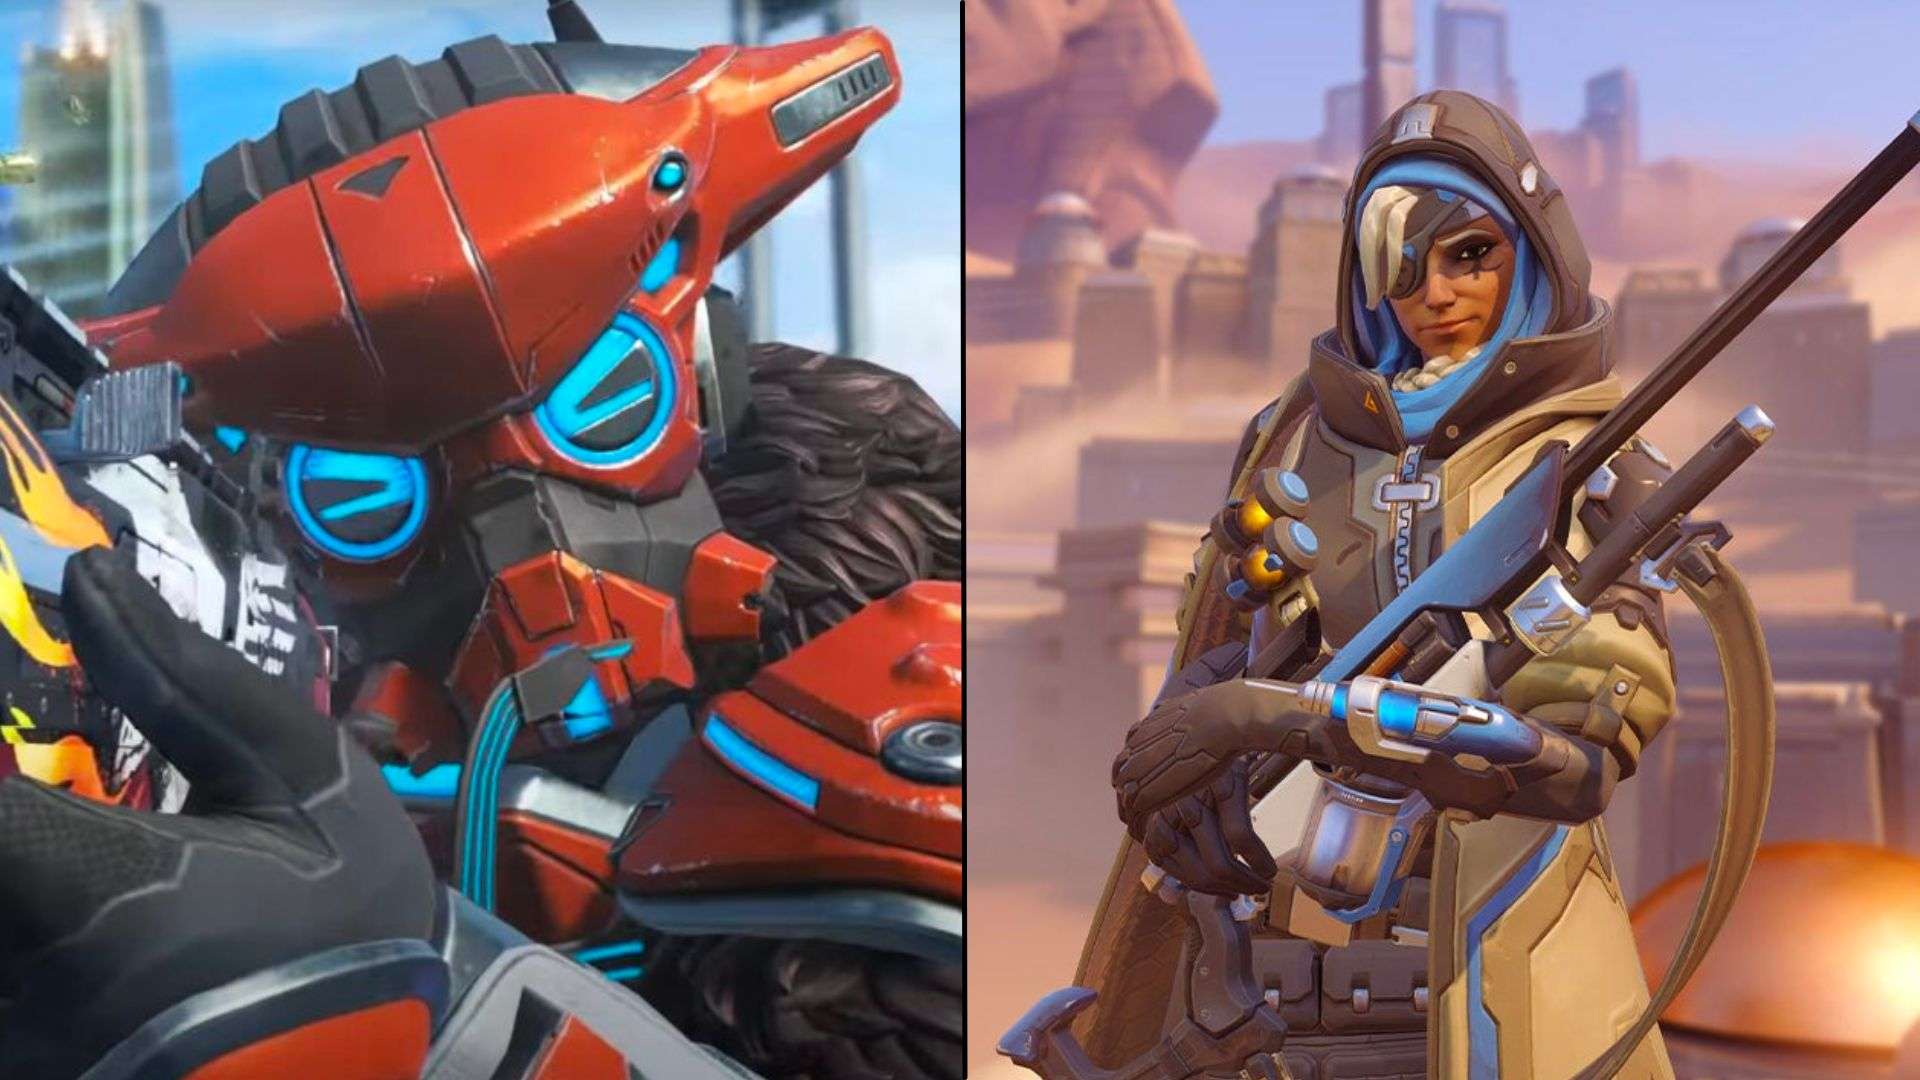 Bloodhound in Apex Legends aiming gun next to Ana from overwatch